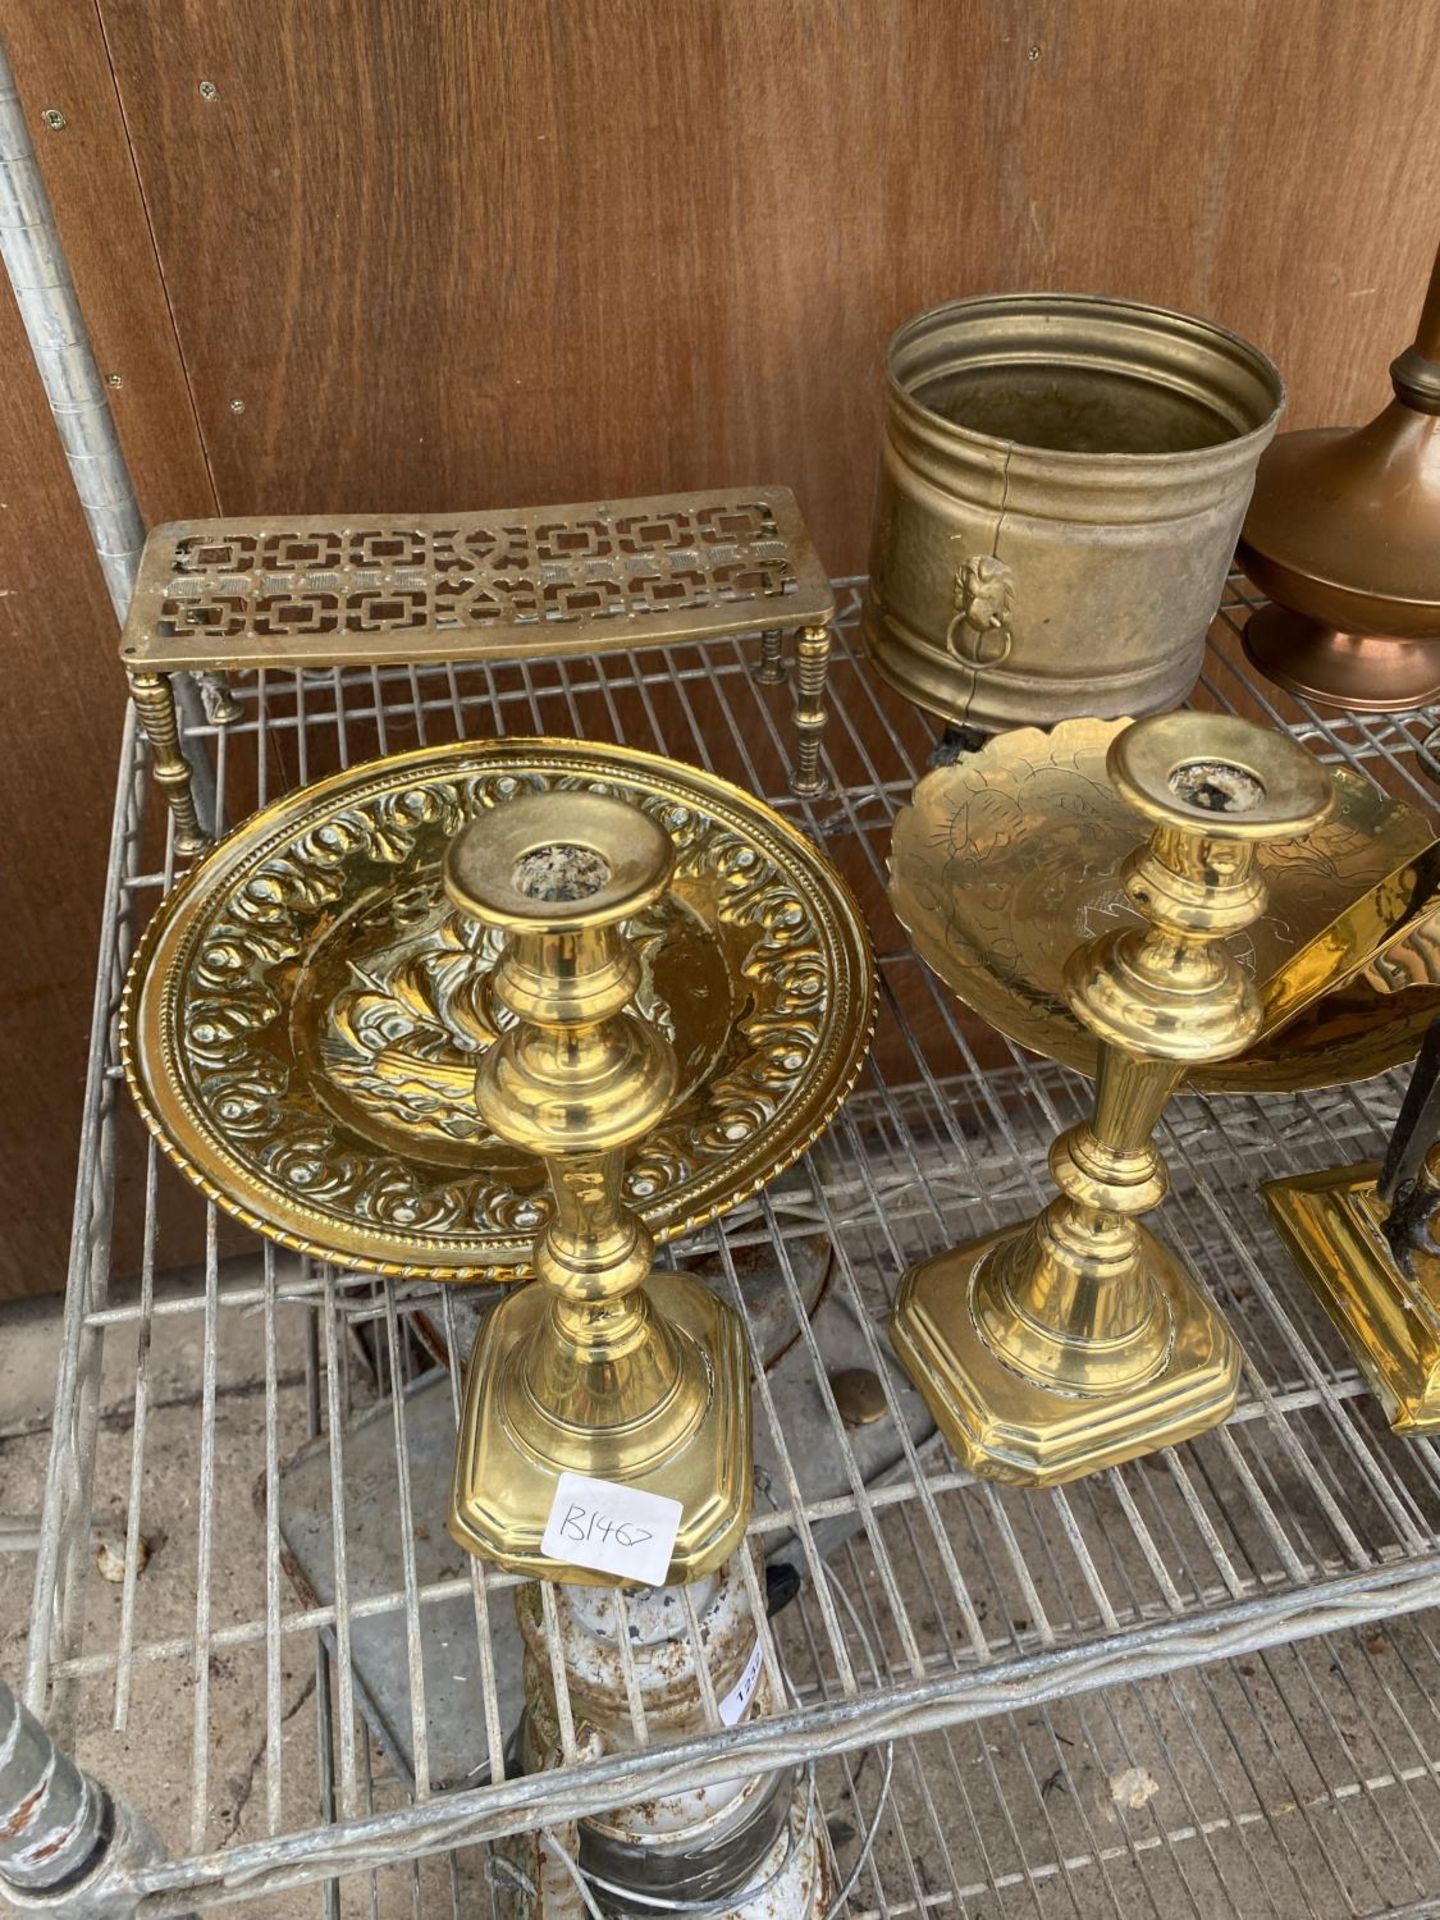 AN ASSORTMENT OF BRASS AND COPPER TO INCLUDE A BRASS FIRESIDE COMPANION SET, BRASS CANDLE STICKS AND - Image 2 of 4